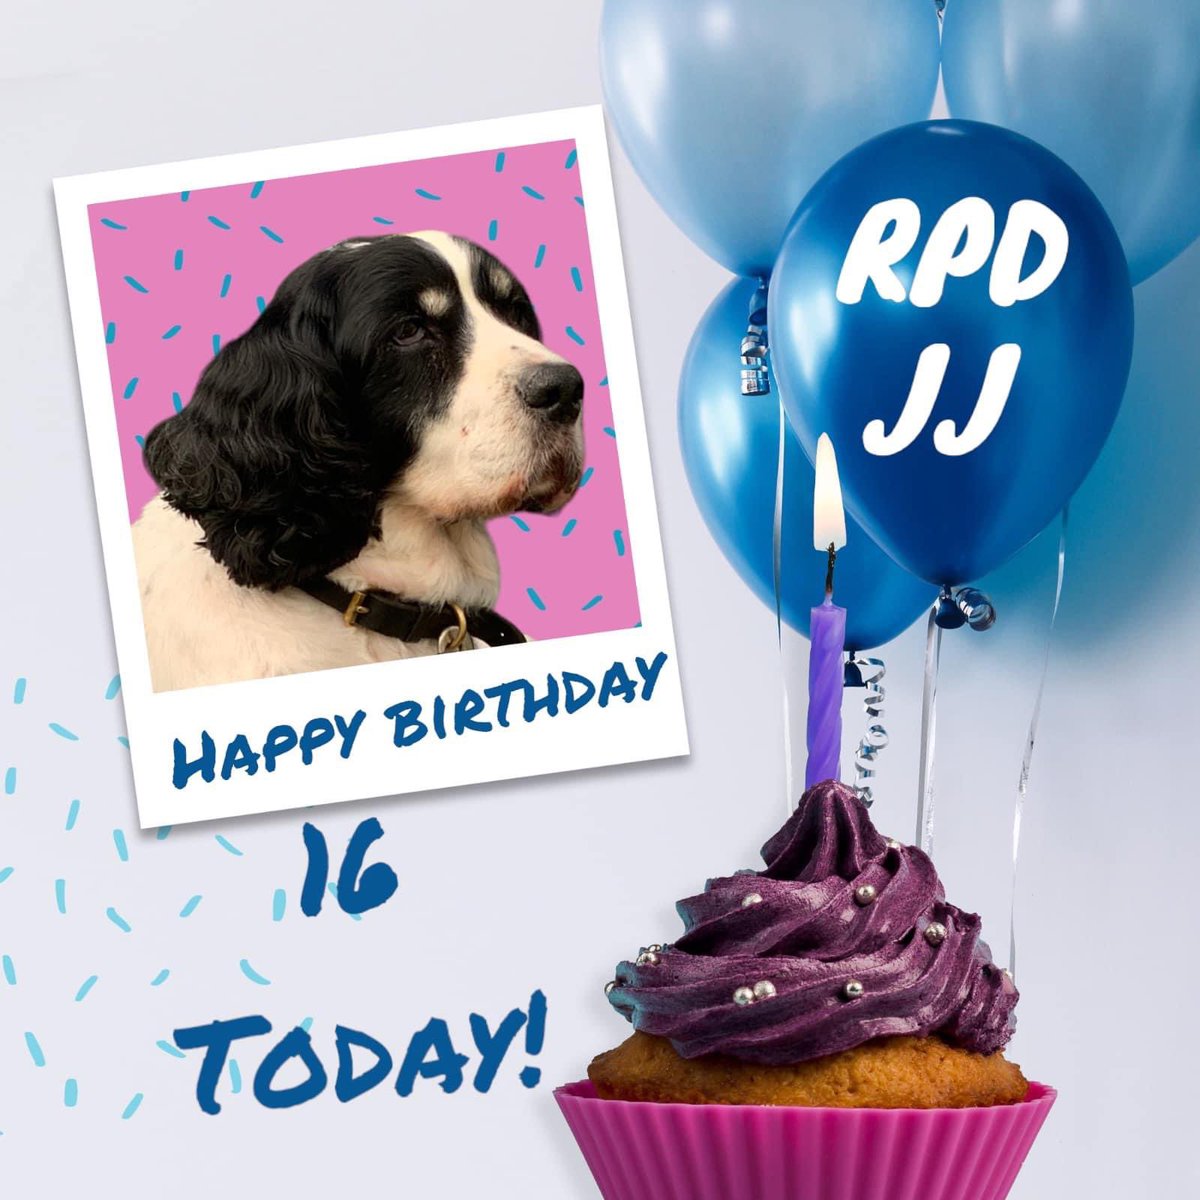 A massive happy birthday to RPD JJ who is 16 years old today 🙌🐾💙

JJ is one of the retired police dogs supported by @ThinBluePaw 💙🙌🐾

#FabulousFinn #Finnslaw #thinbluepaw #happybirthday